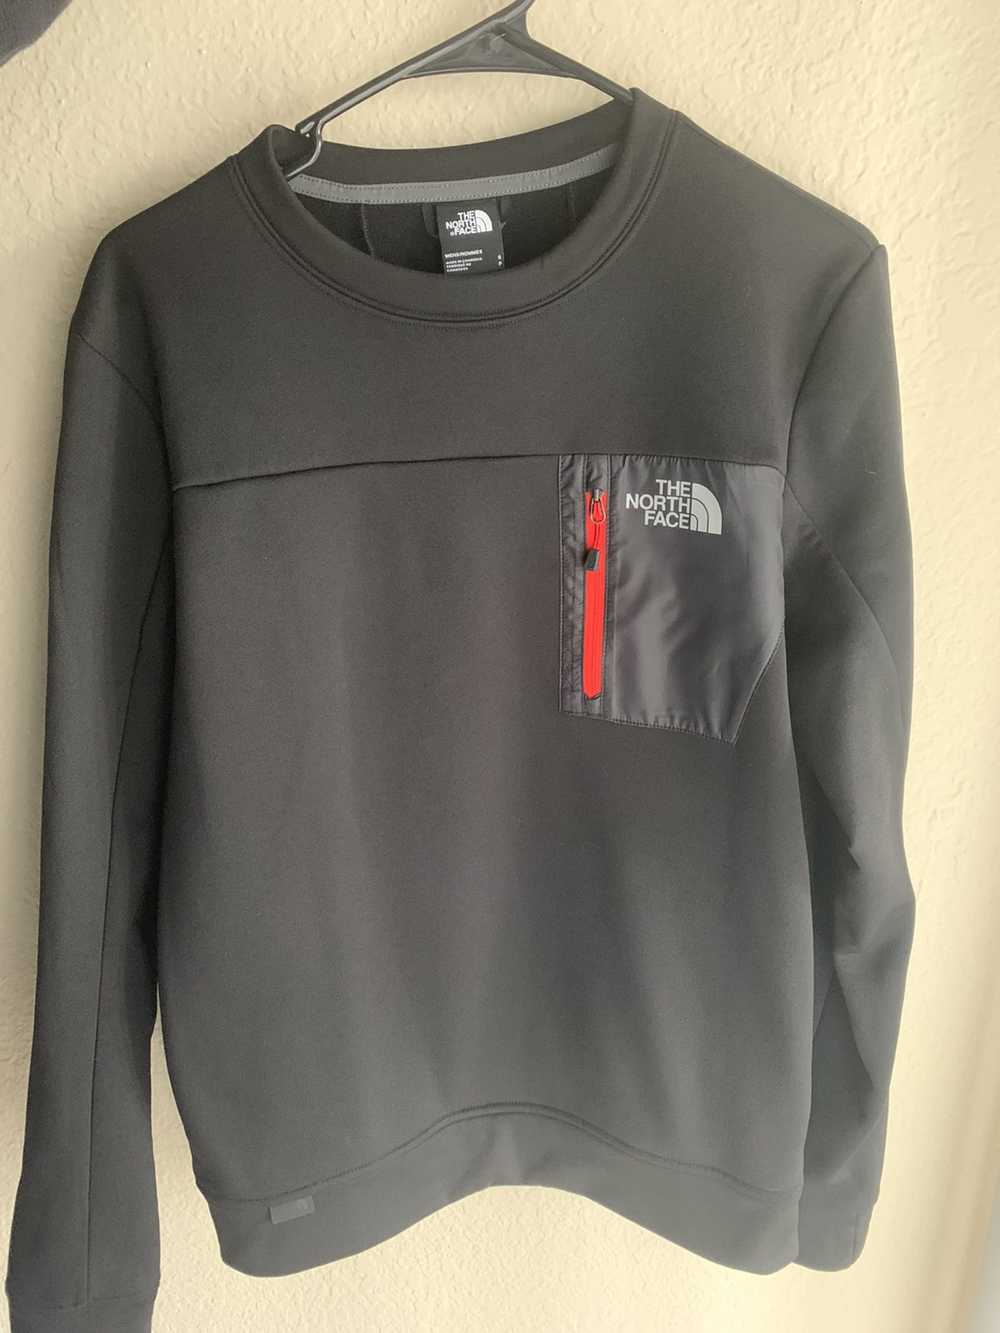 The North Face The north face sweatshirt - image 1